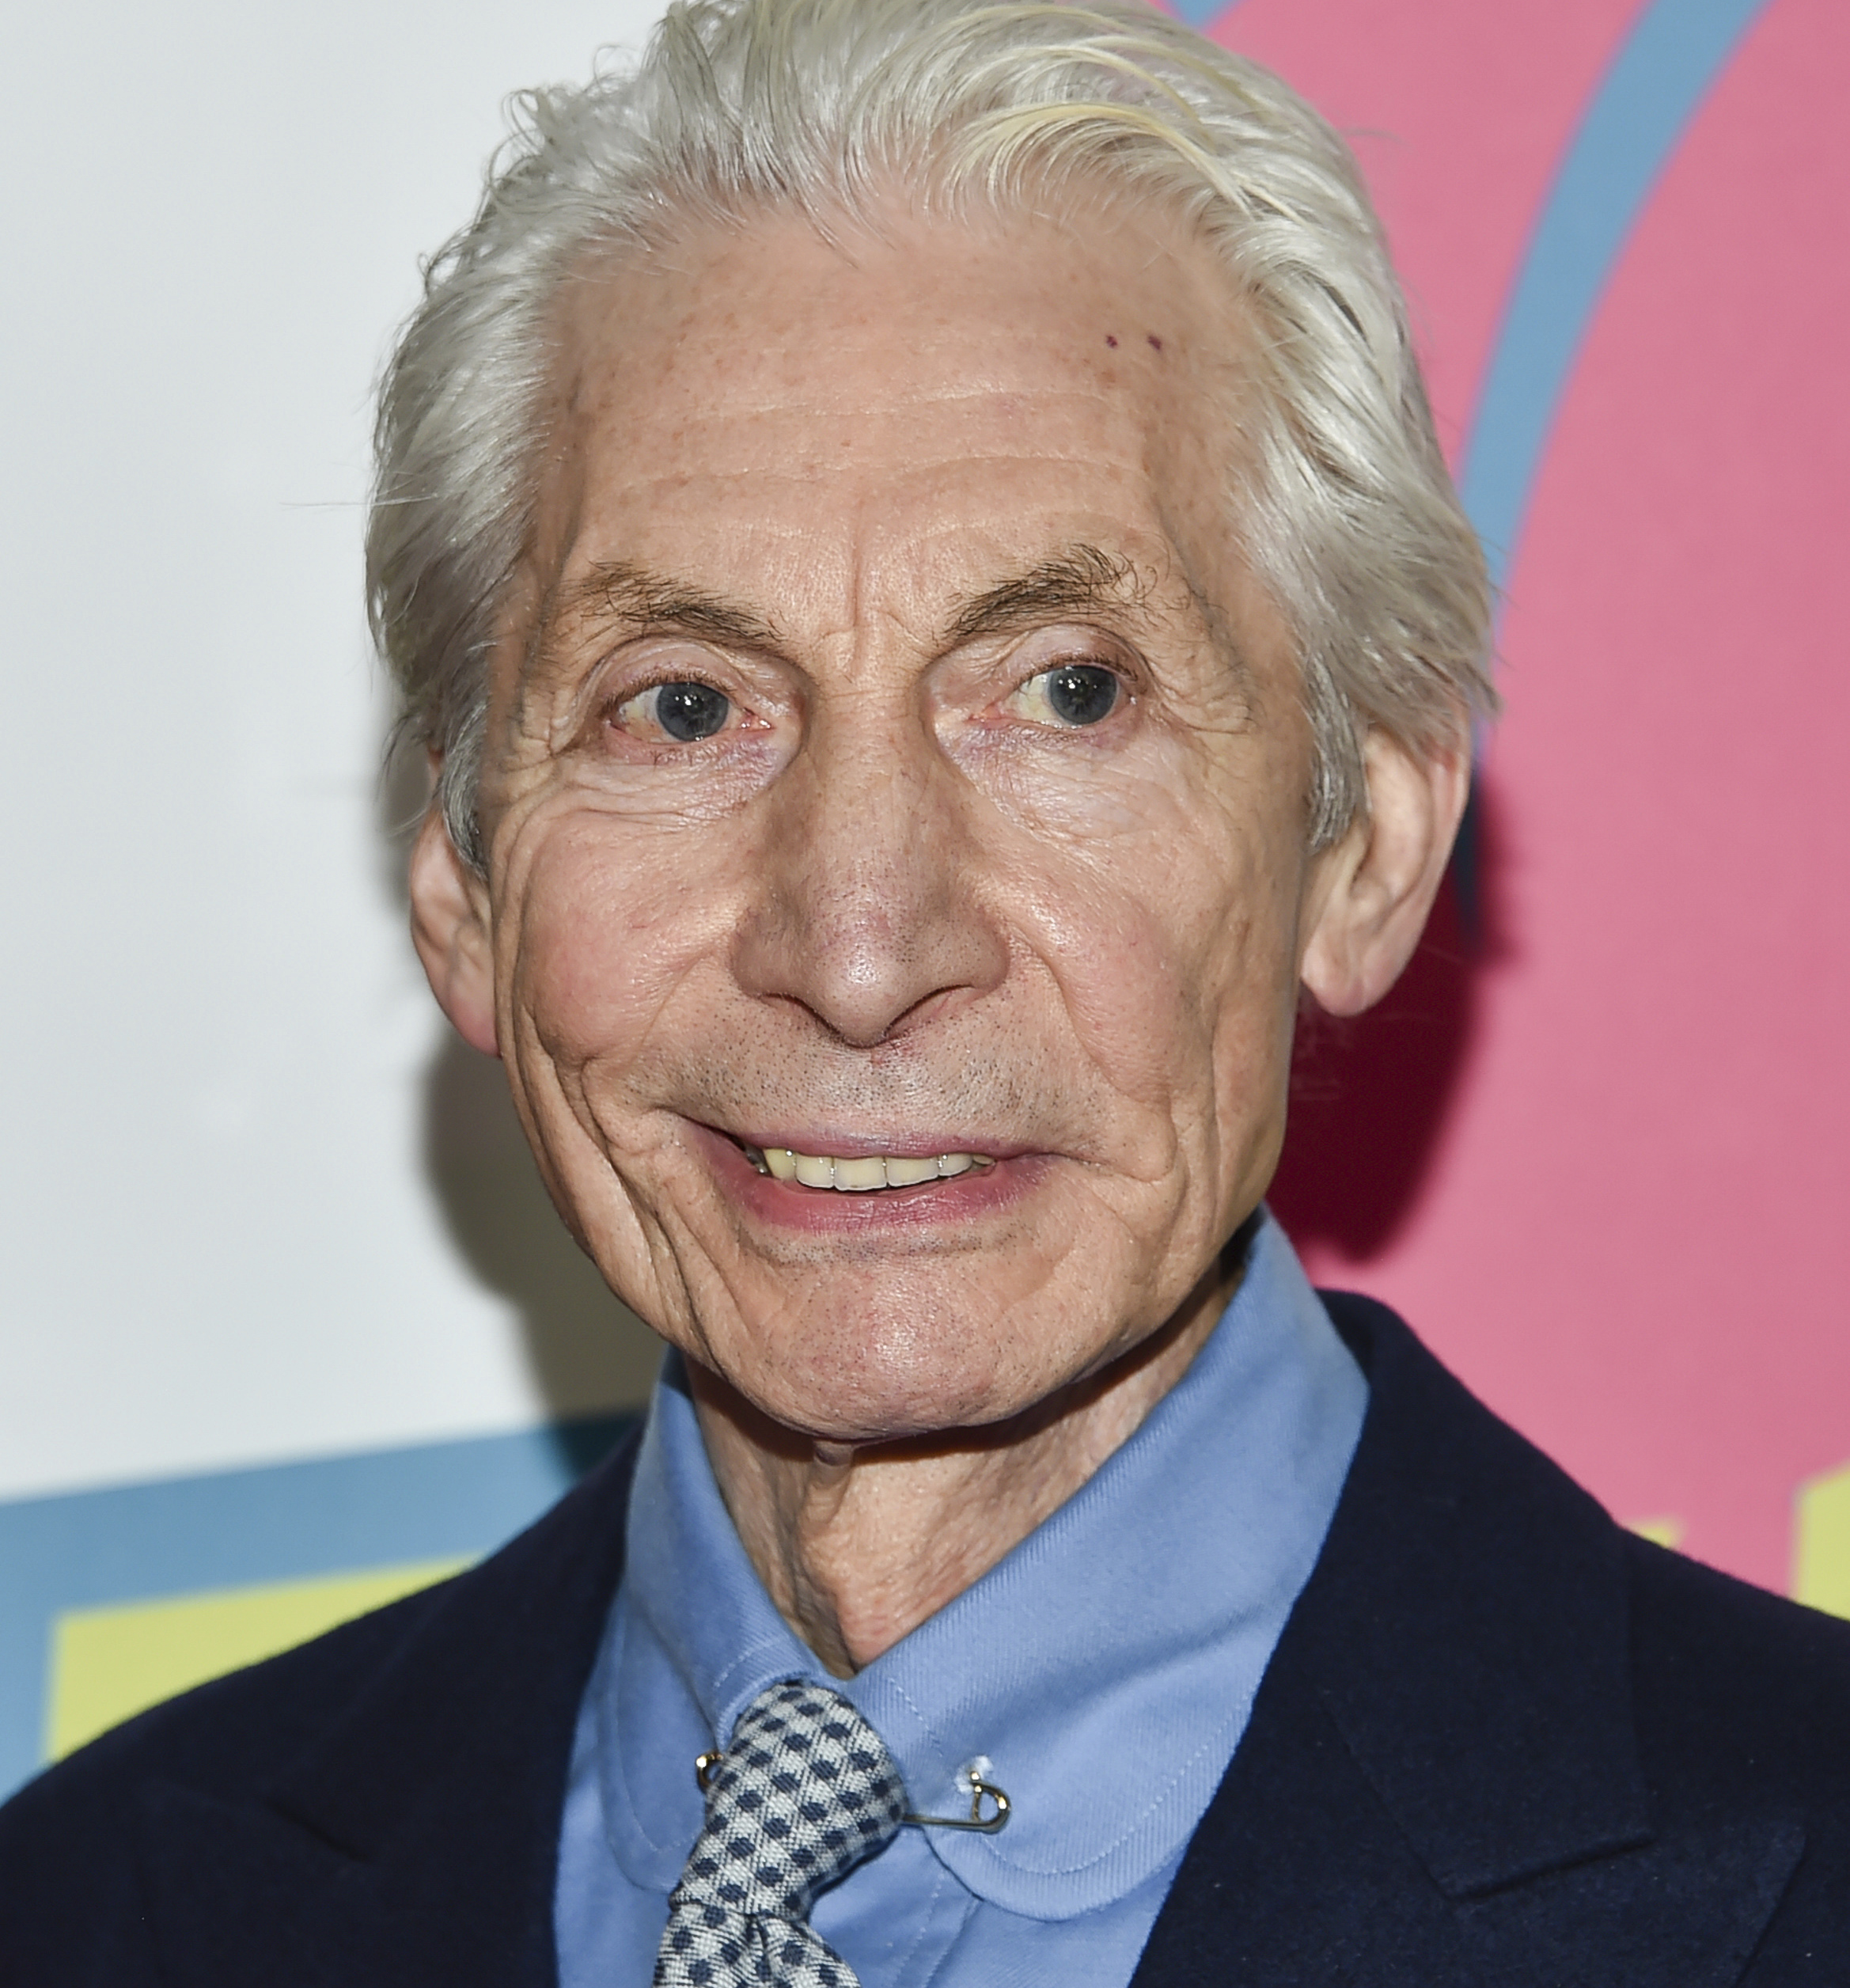 Rolling Stones Drummer Charlie Watts attends The Rolling Stones "Exhibitionism" exhibit opening night party on Nov. 15, 2016, in New York. 